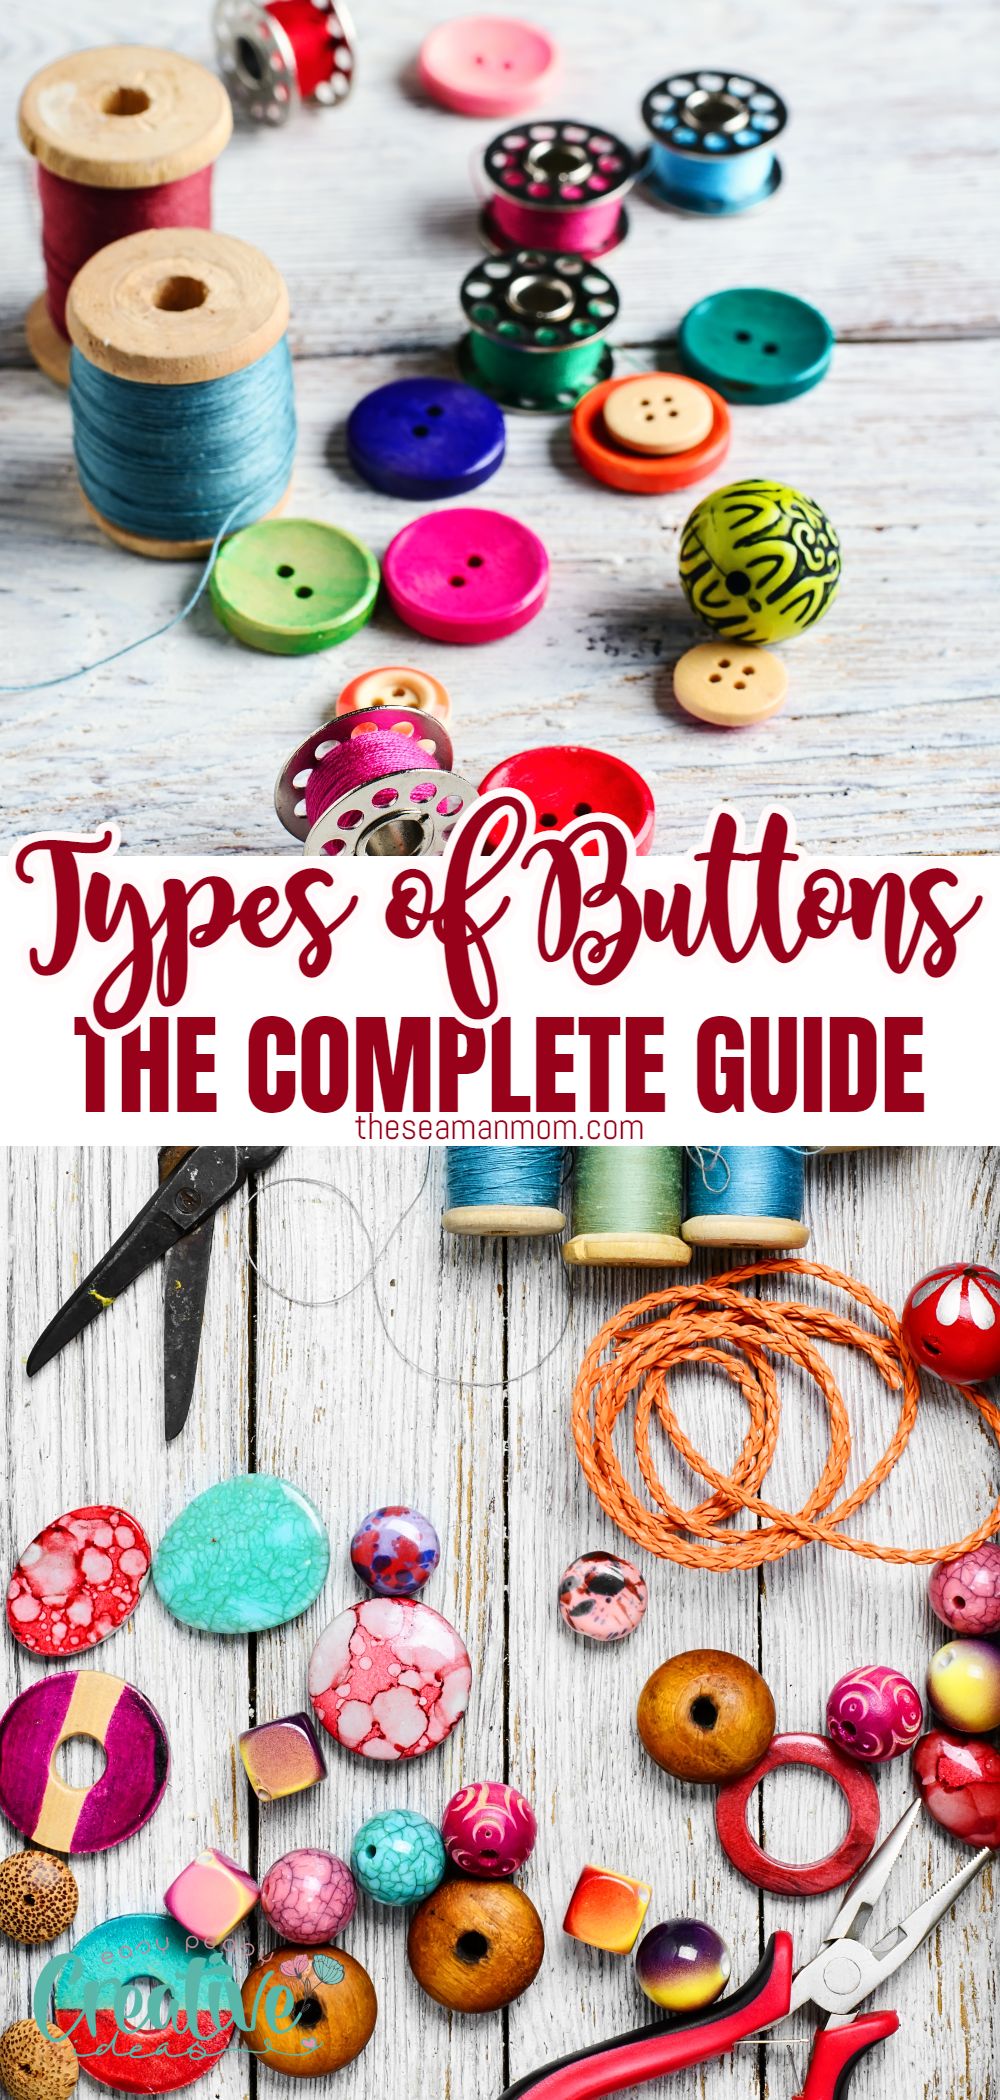 There are many types of buttons available for sewing, and each type has its own distinct advantages and disadvantages. In this guide, we'll explore the different types of buttons so you can choose the best option for your project. via @petroneagu